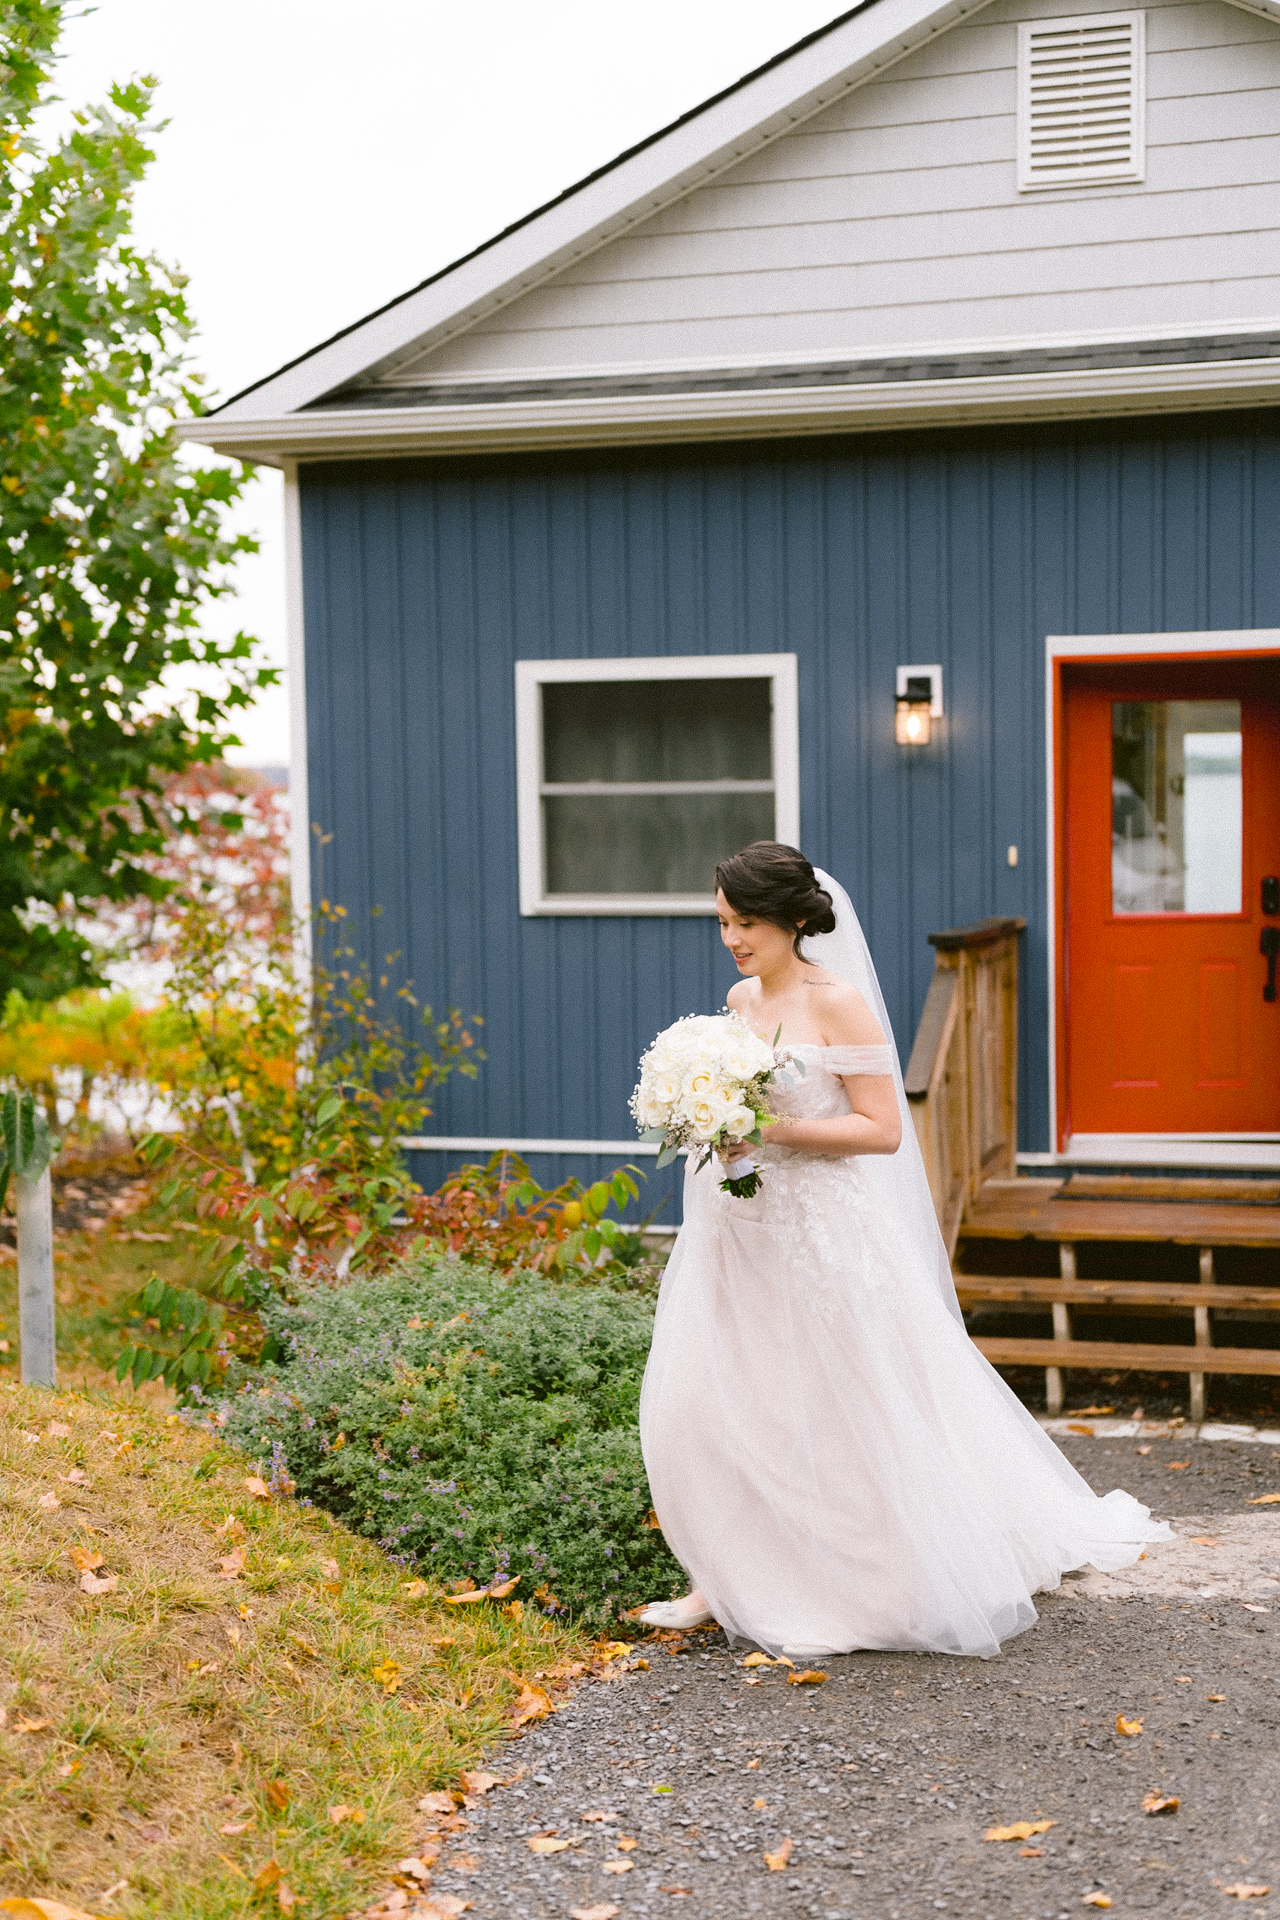 A bride in a white gown holding a floral bouquet stands in front of a blue house with a red door.